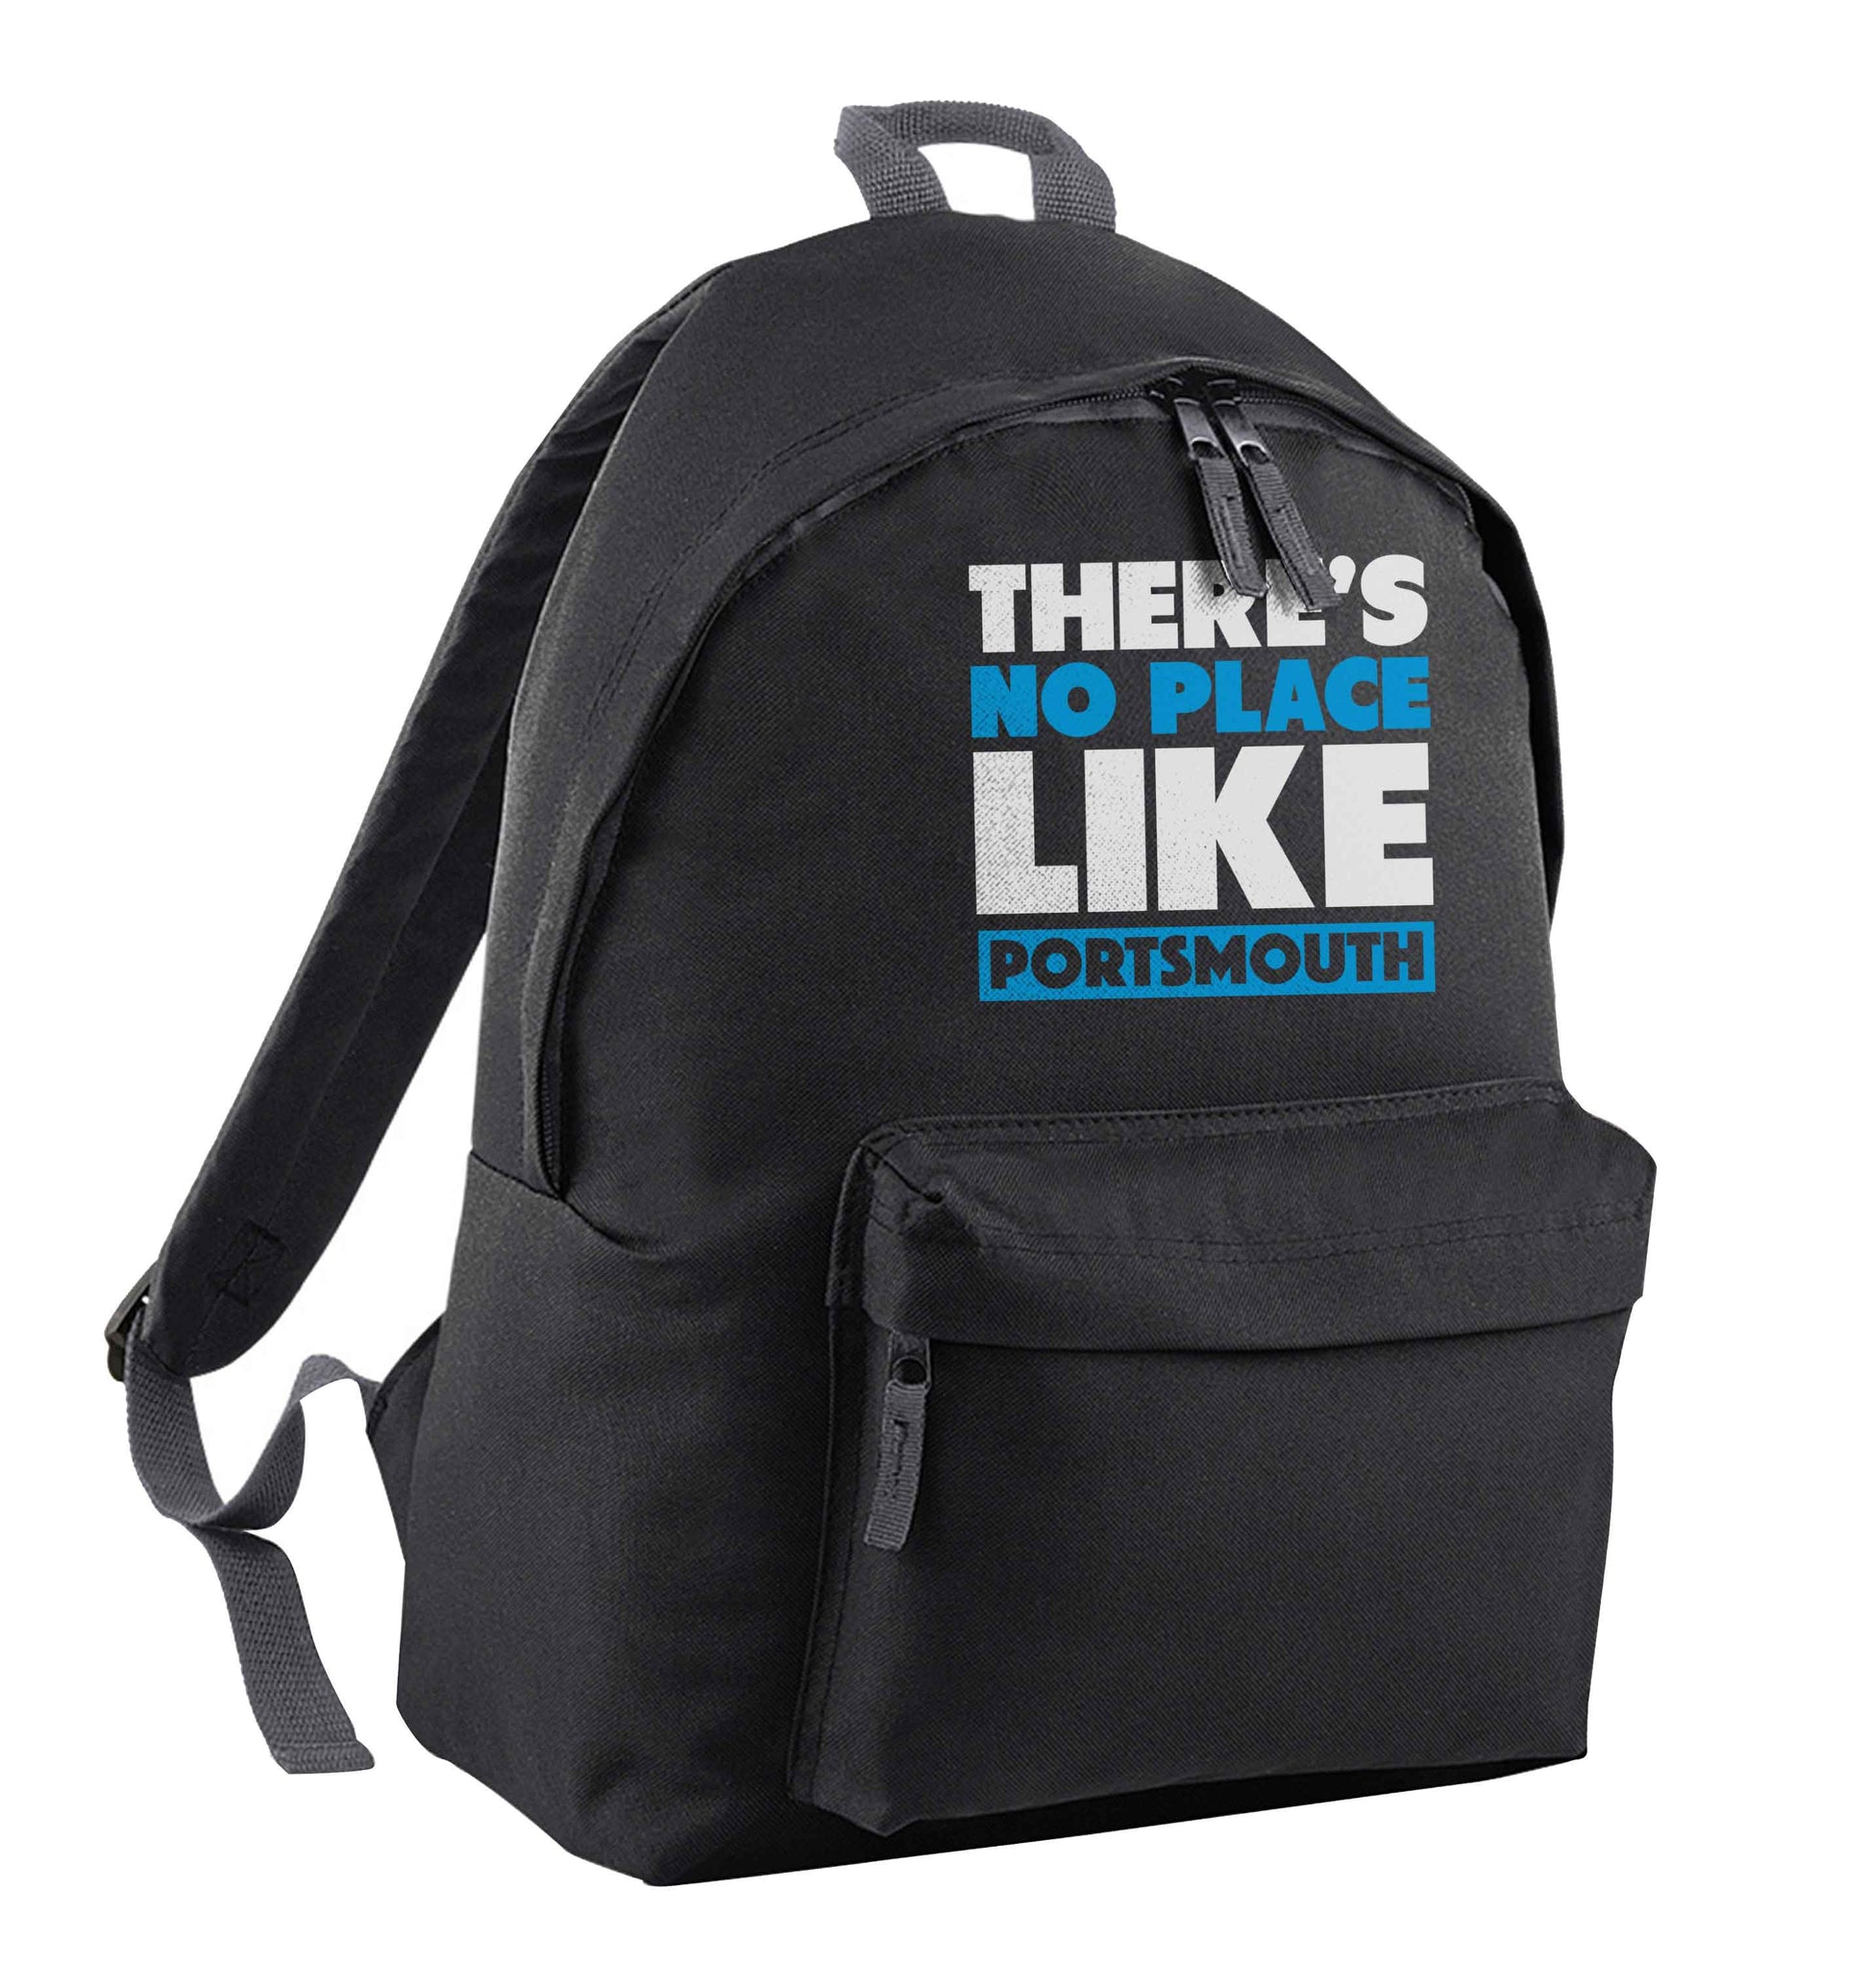 There's no place like Porstmouth black adults backpack